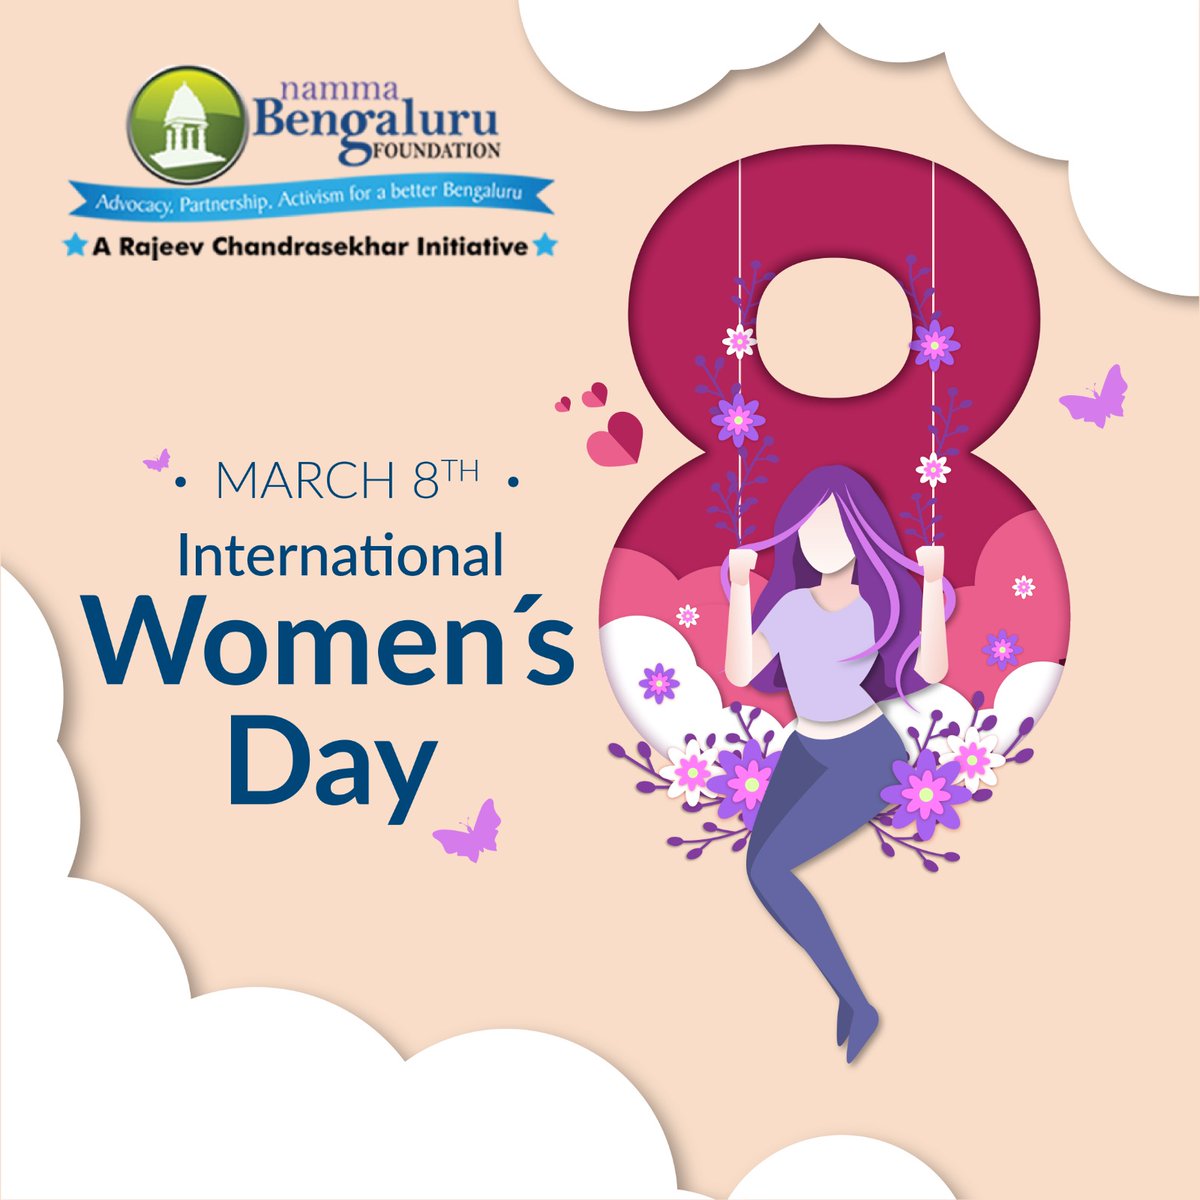 This International Women's Day, let's pledge to #InvestInWomen and accelerate progress by addressing economic empowerment. Empowered women drive positive change and inspire inclusion! #WomensDay #WomensDay2024 #WomensHealth #Womens #bengaluru